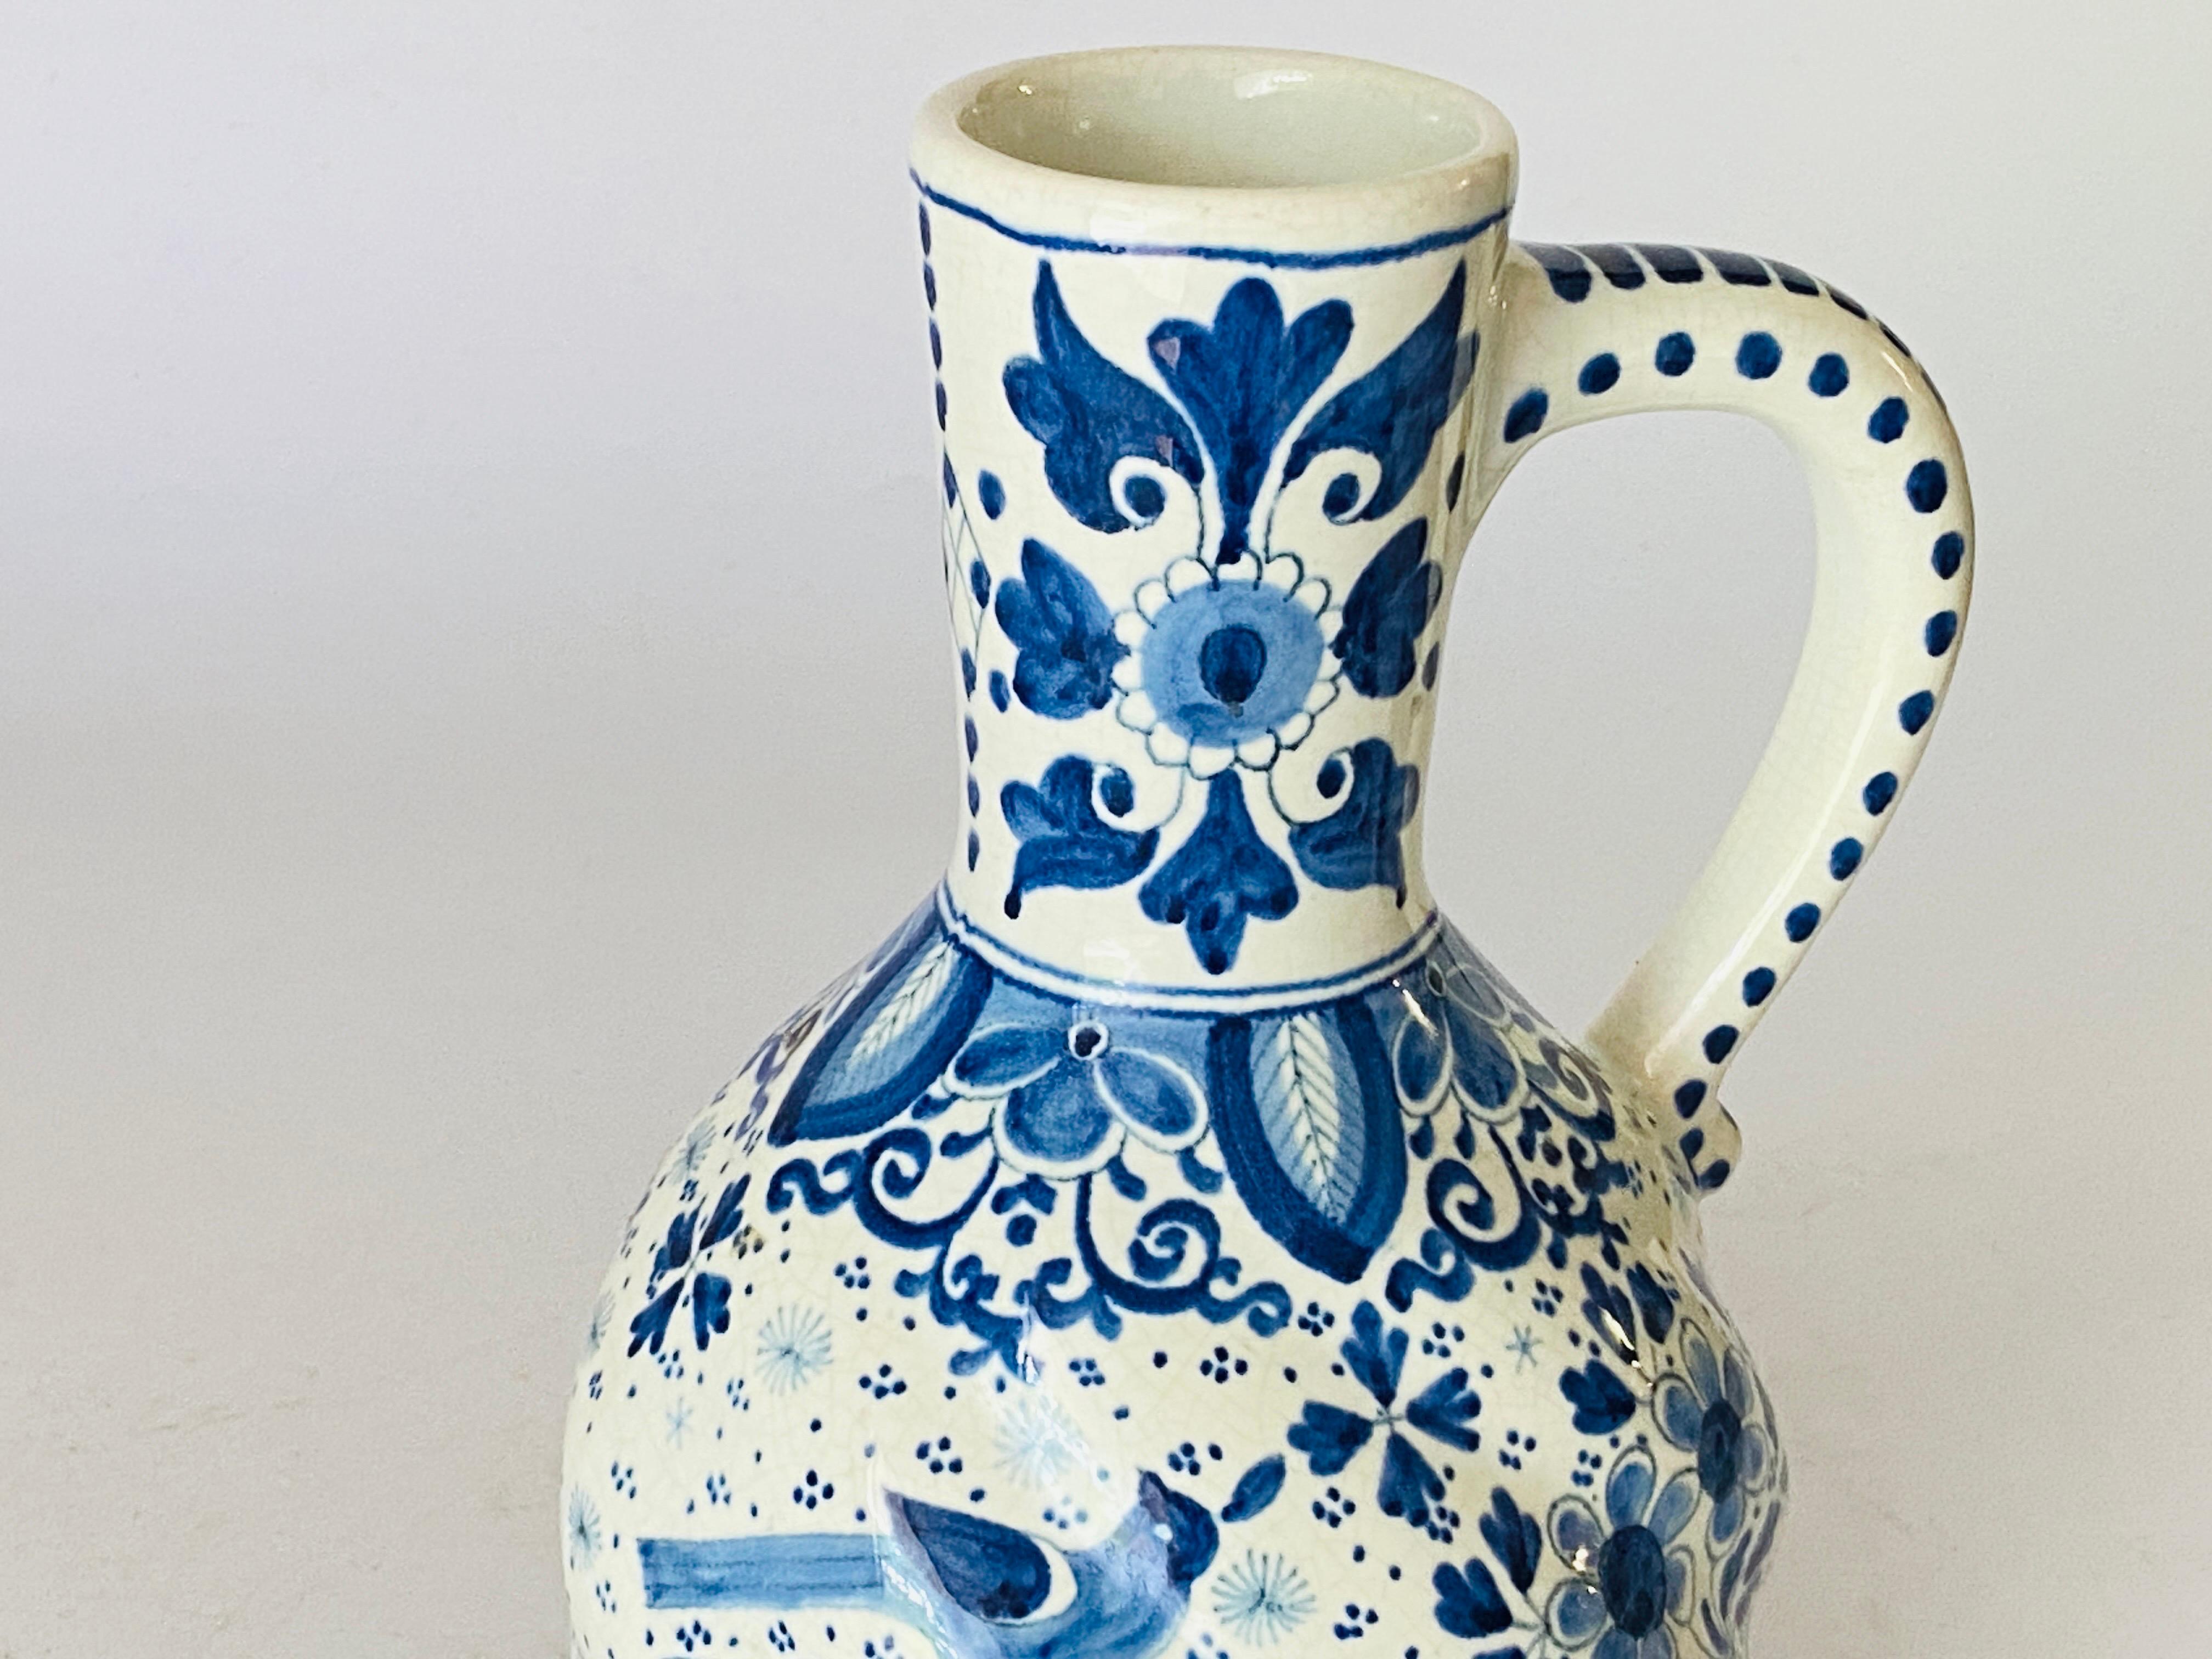 This pot is in Faïence, in white and blue. They has been made in Netherlands, in the 19th century. they are Delft pieces. It is signed underneath.